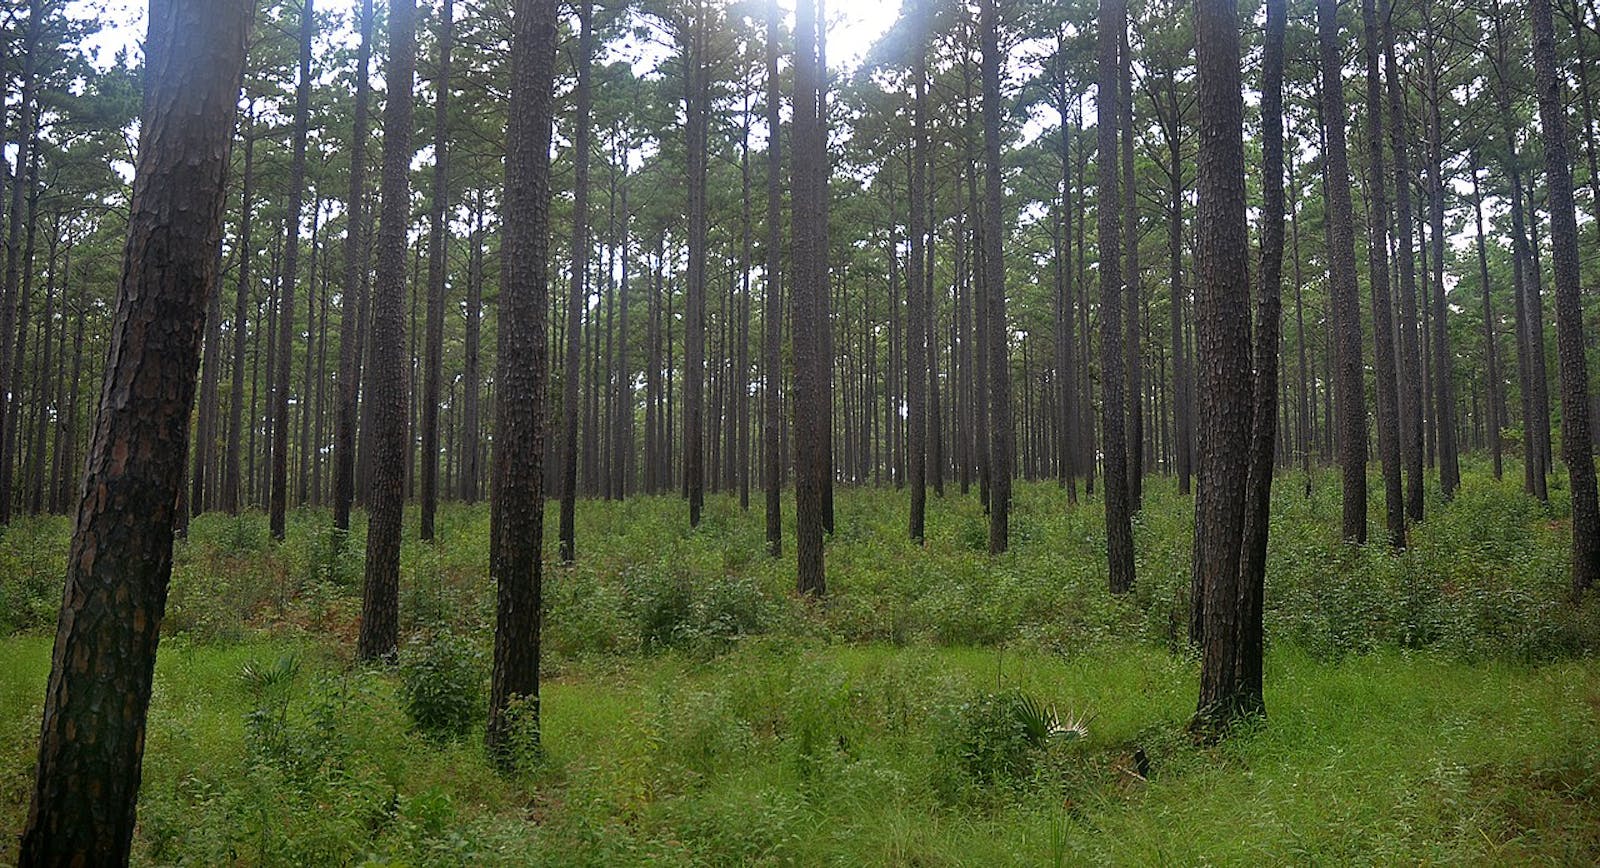 Piney Woods Forests